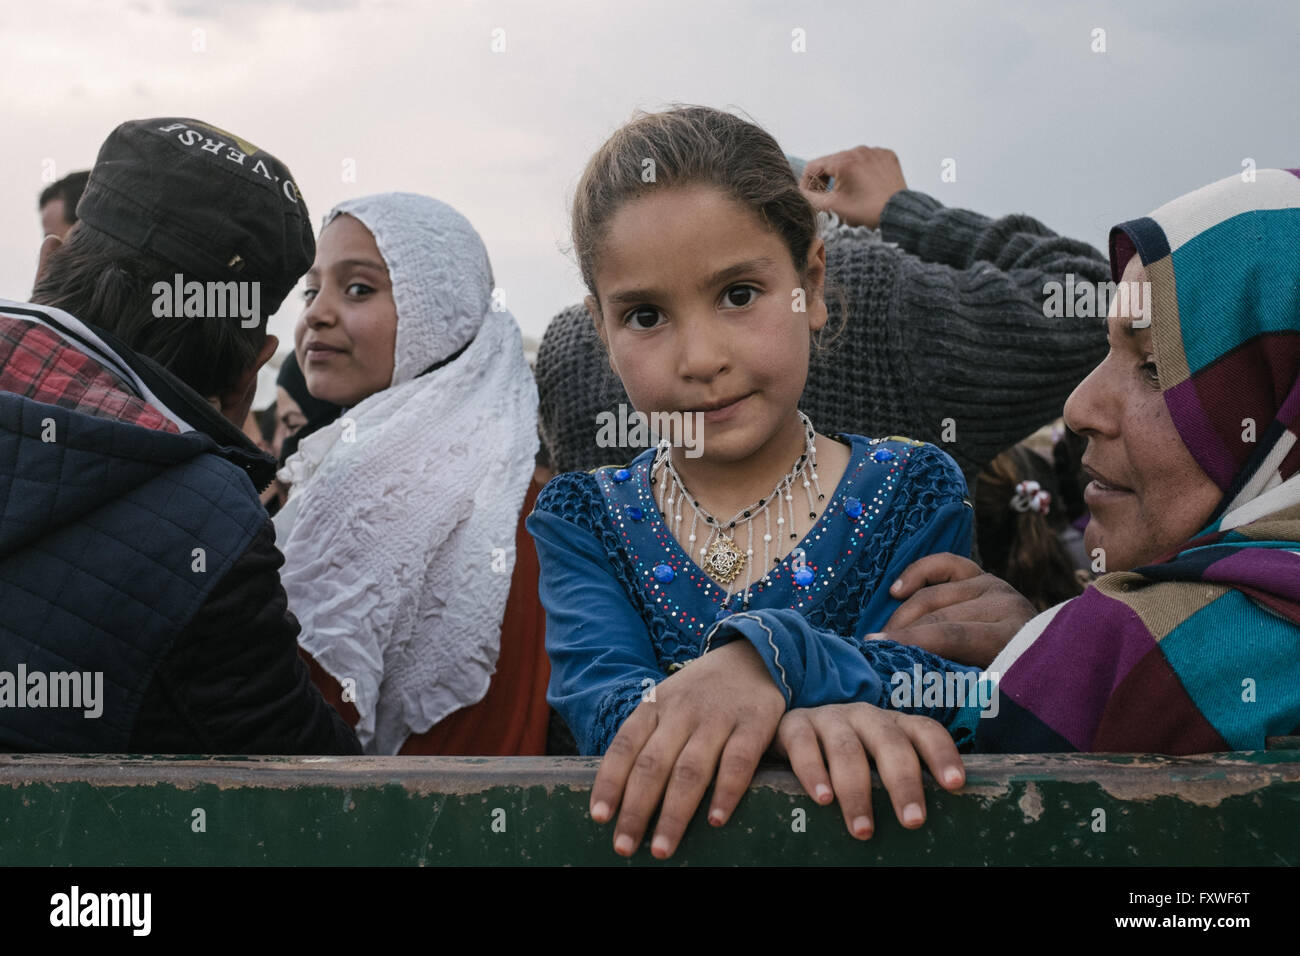 Peshmergas help refugiees fleeing Mosul -  07/04/2016  -  Iraq / Mosul  -  People wait in Van that will take them to a refugees  Stock Photo